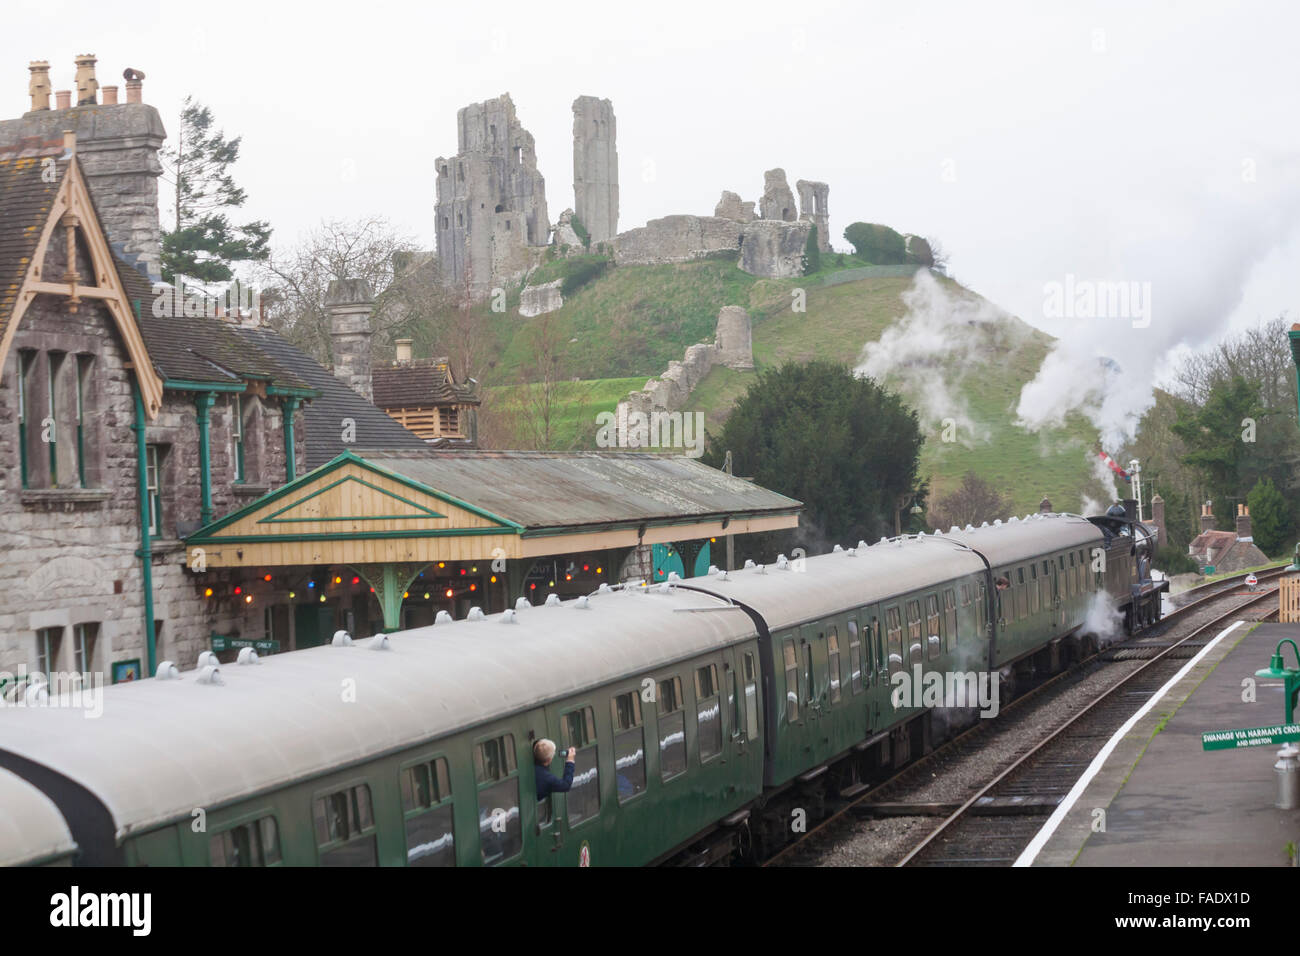 Corfe Castle, Dorset, UK. 28 December 2015. Winter Warm up on Swanage Railway sees historic trains, steam and diesel, run between Swanage and Norden railway, via Corfe Castle. Victorian built  30120 T9 “Greyhound” class express locomotive from 1899 – the only surviving T9 locomotive in the world. Credit:  Carolyn Jenkins/Alamy Live News Stock Photo